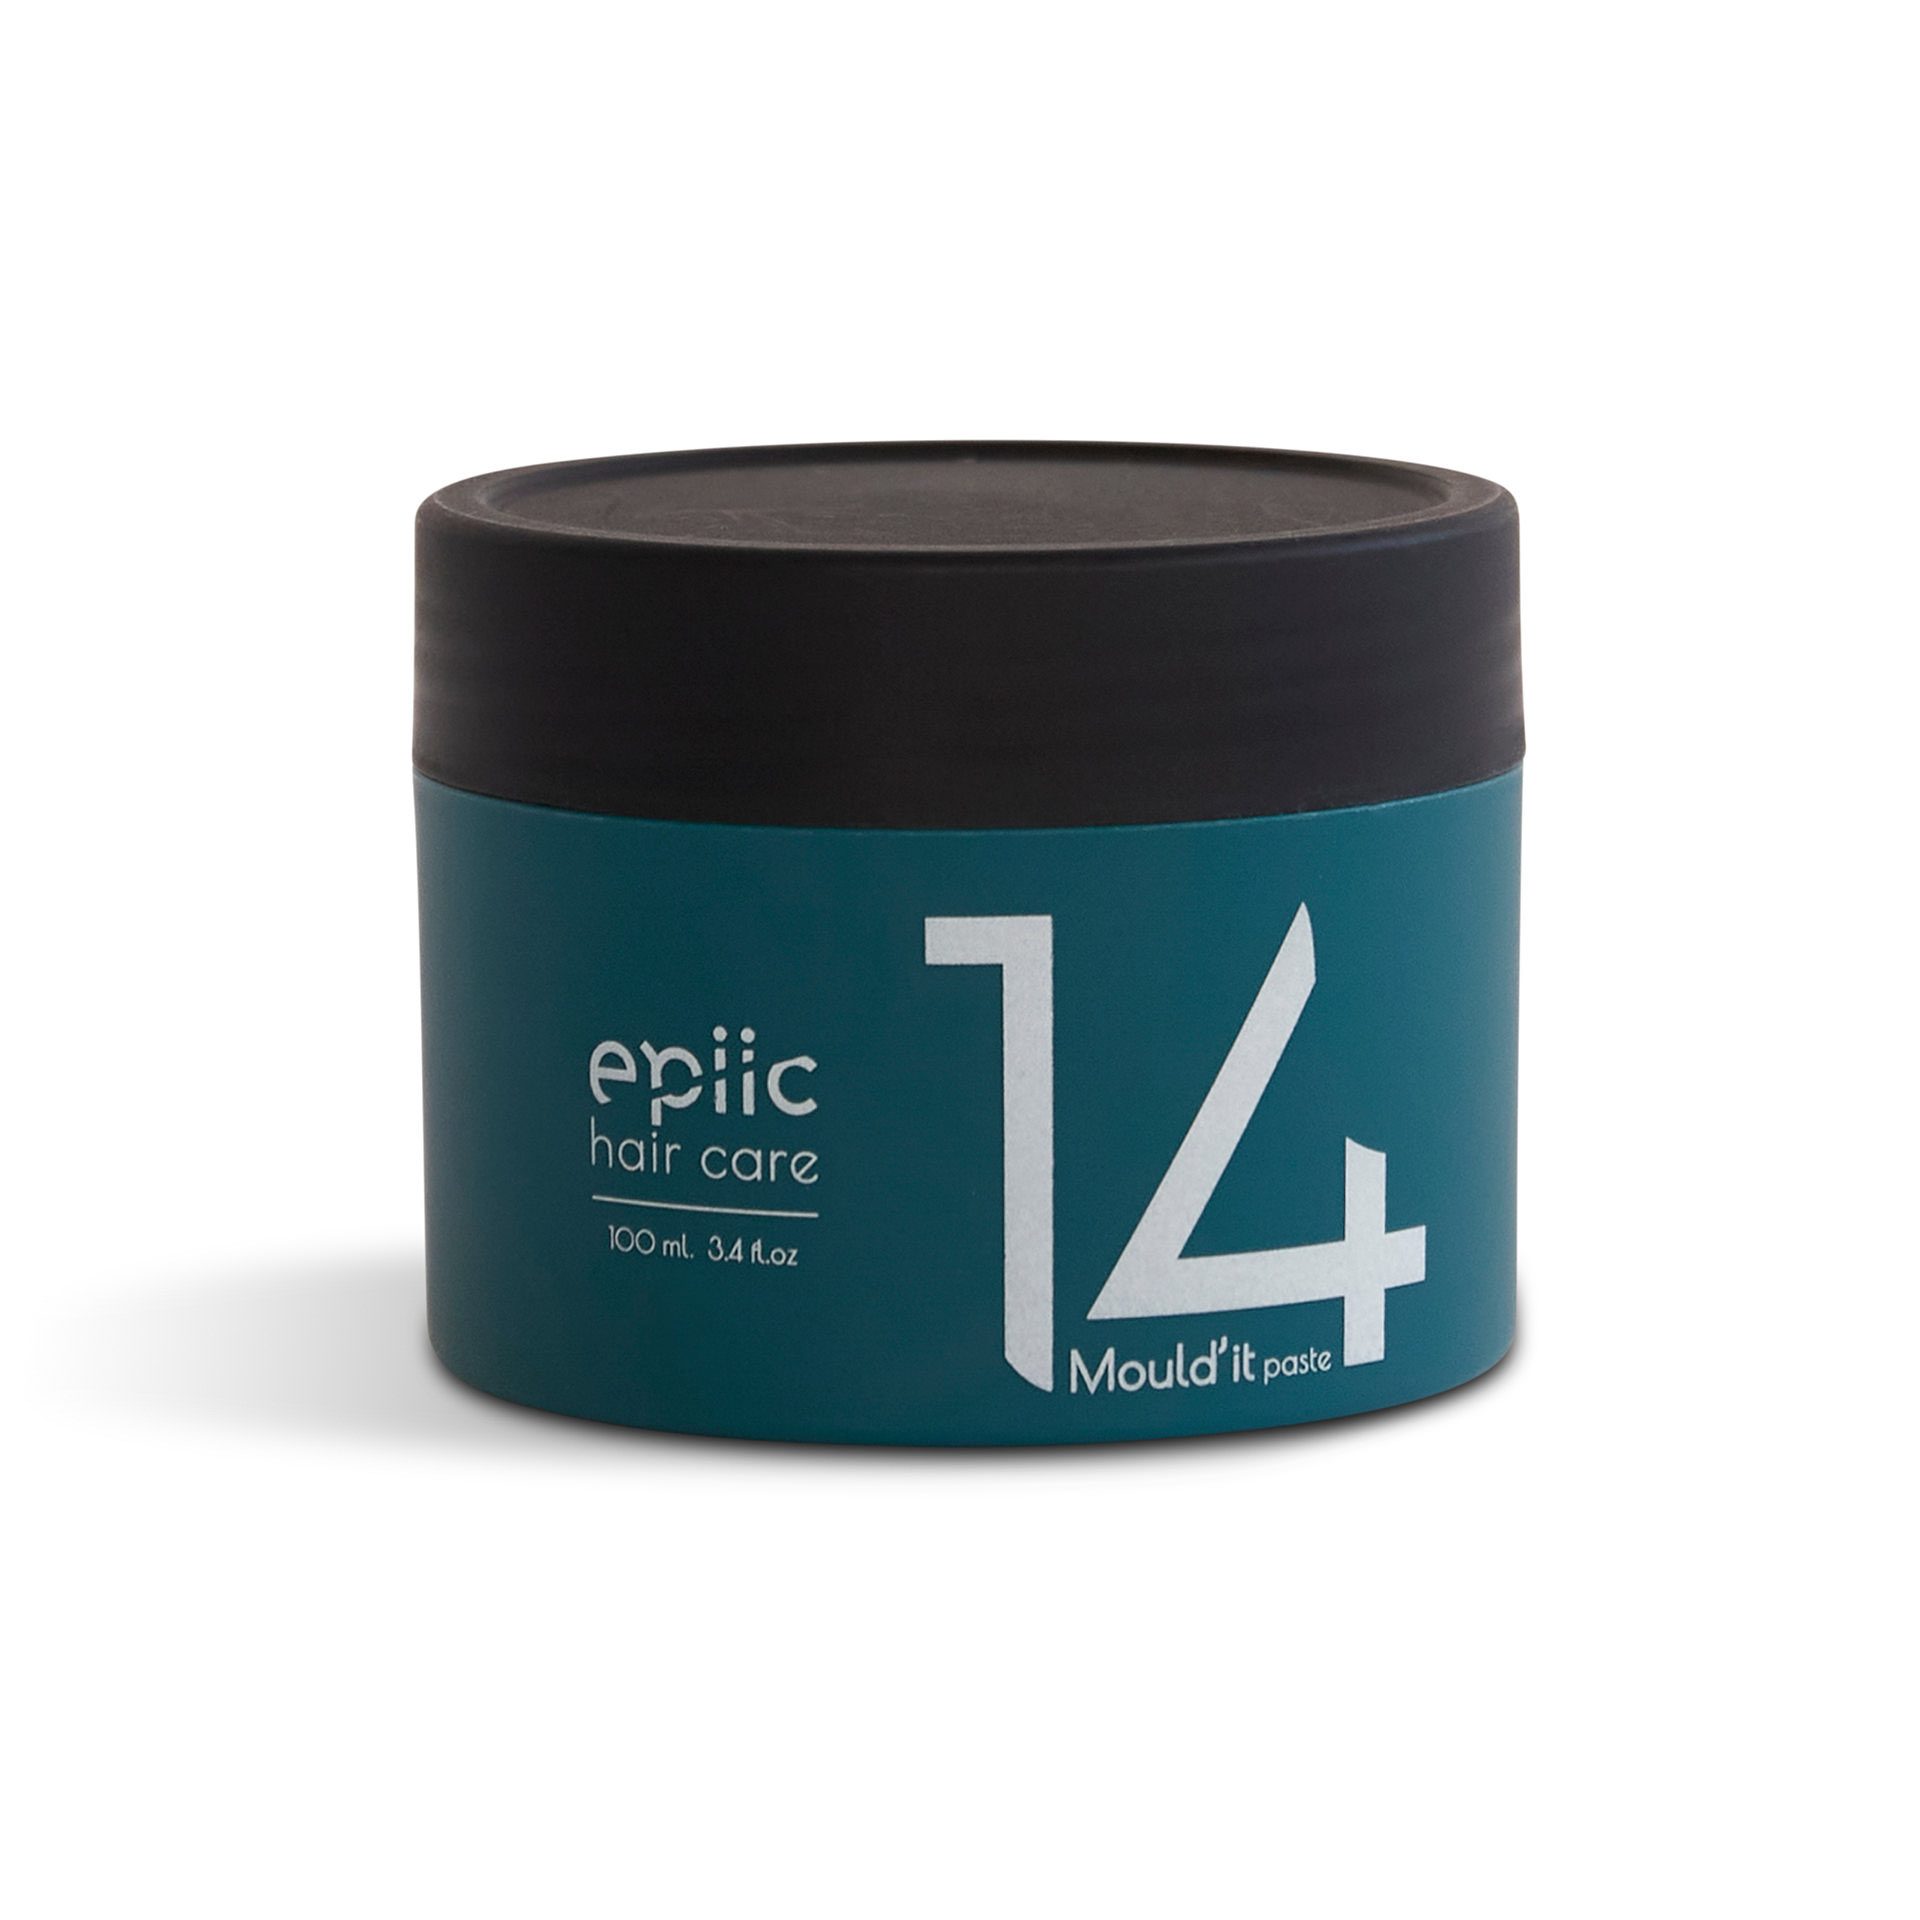 epiic hair care Mould'it paste nr. 14 - 100ml